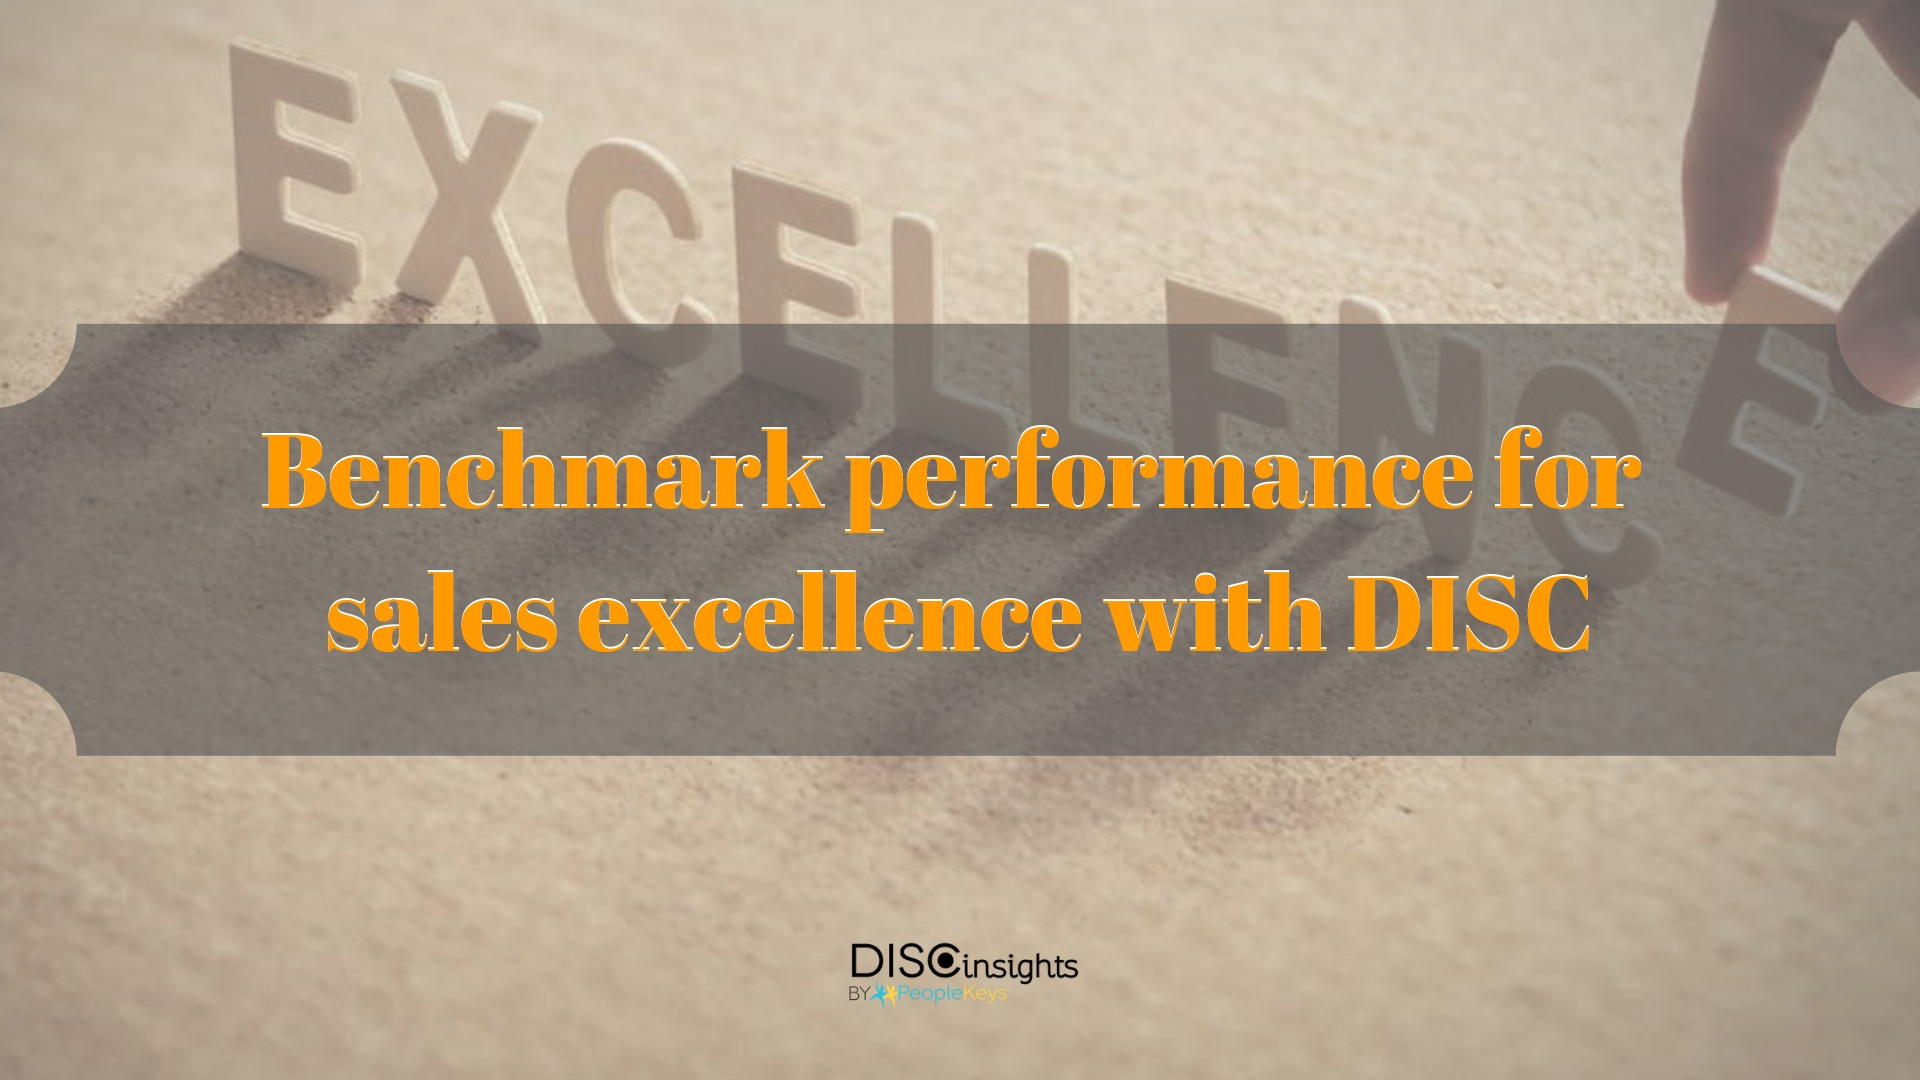 Benchmark performance for sales excellence with DISC